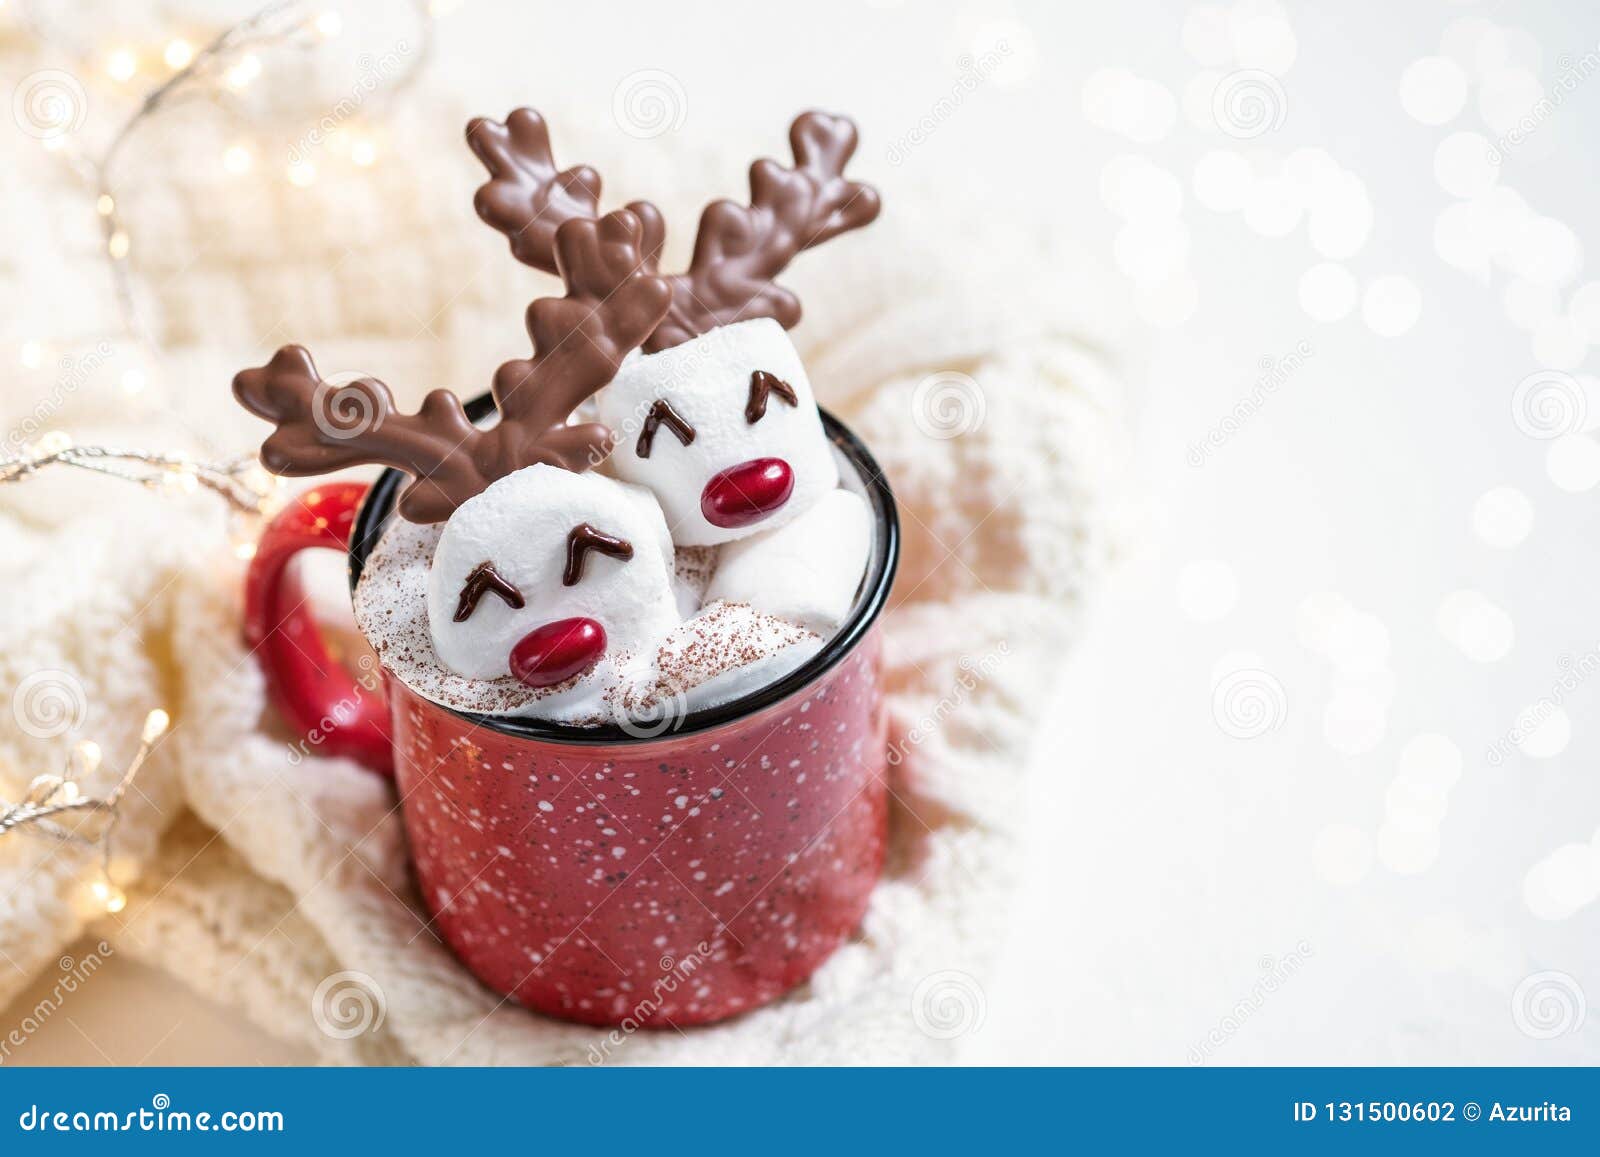 Reindeer Marshmallow Hot Cocoa Toppers - Lifestyle of a Foodie